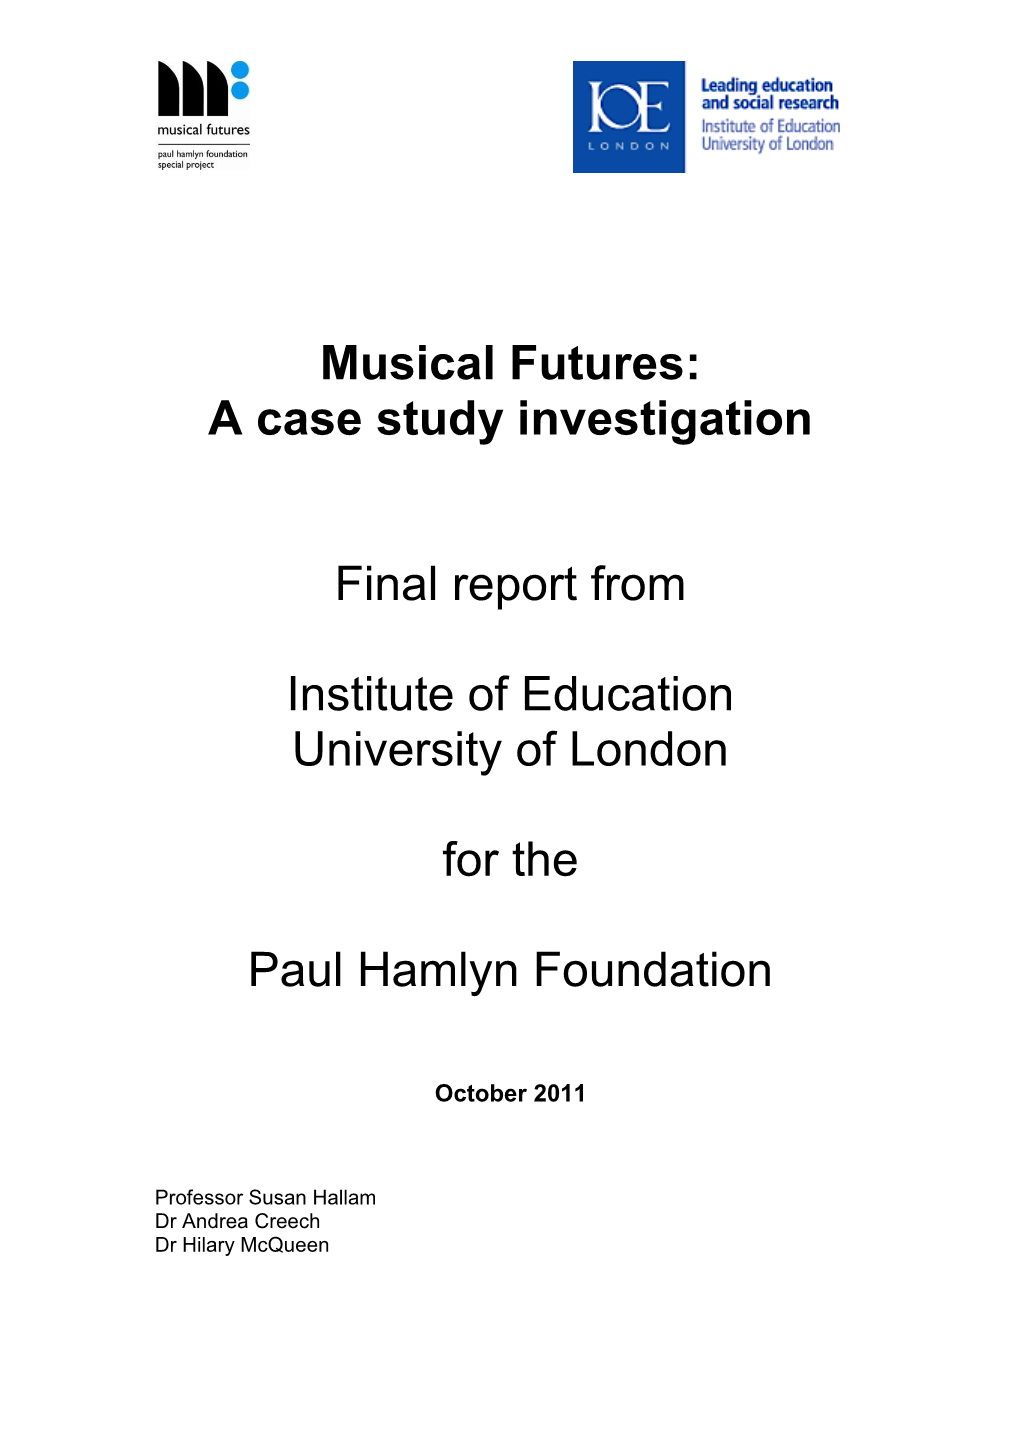 Musical Futures: a Case Study Investigation Final Report From